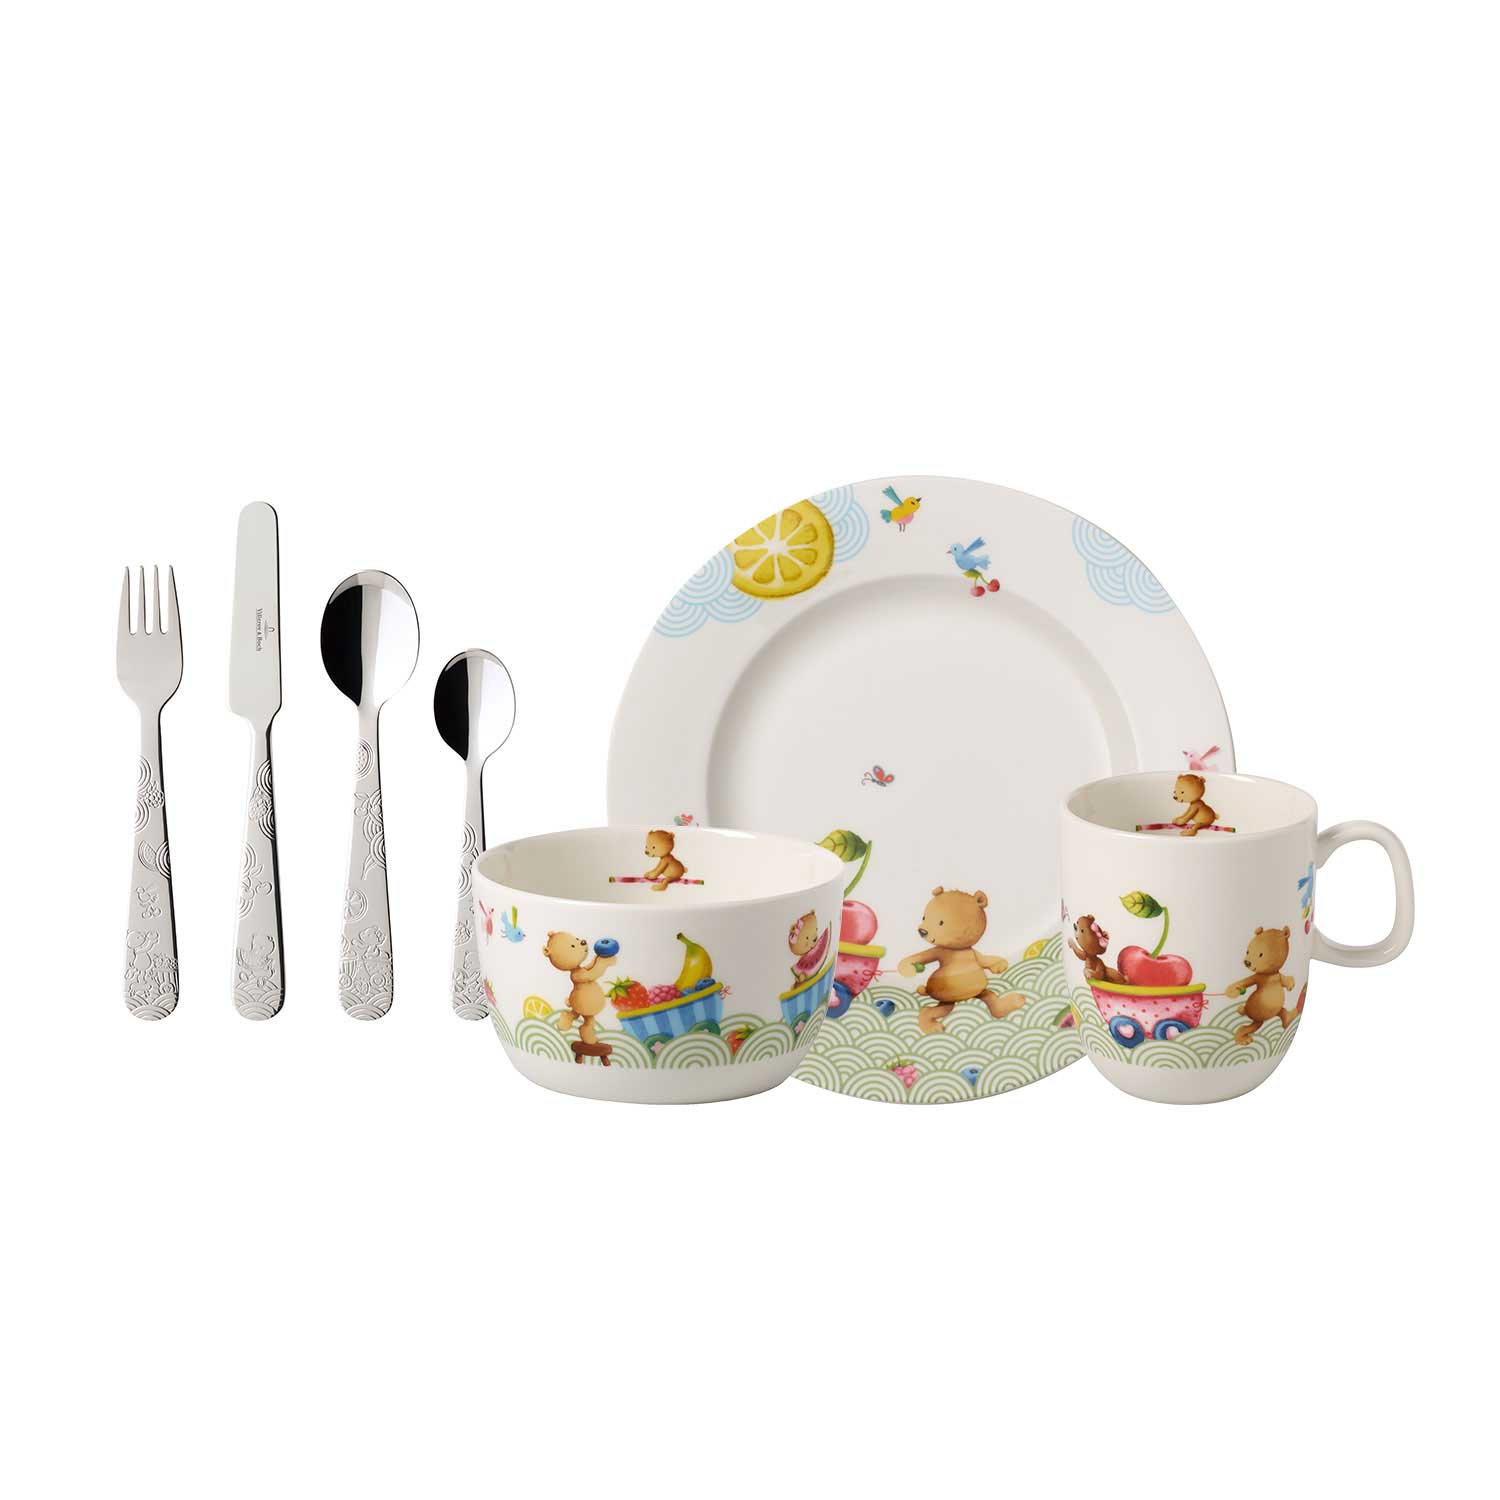 Hungry As A Bear Children’s Tableware 7 Pcs